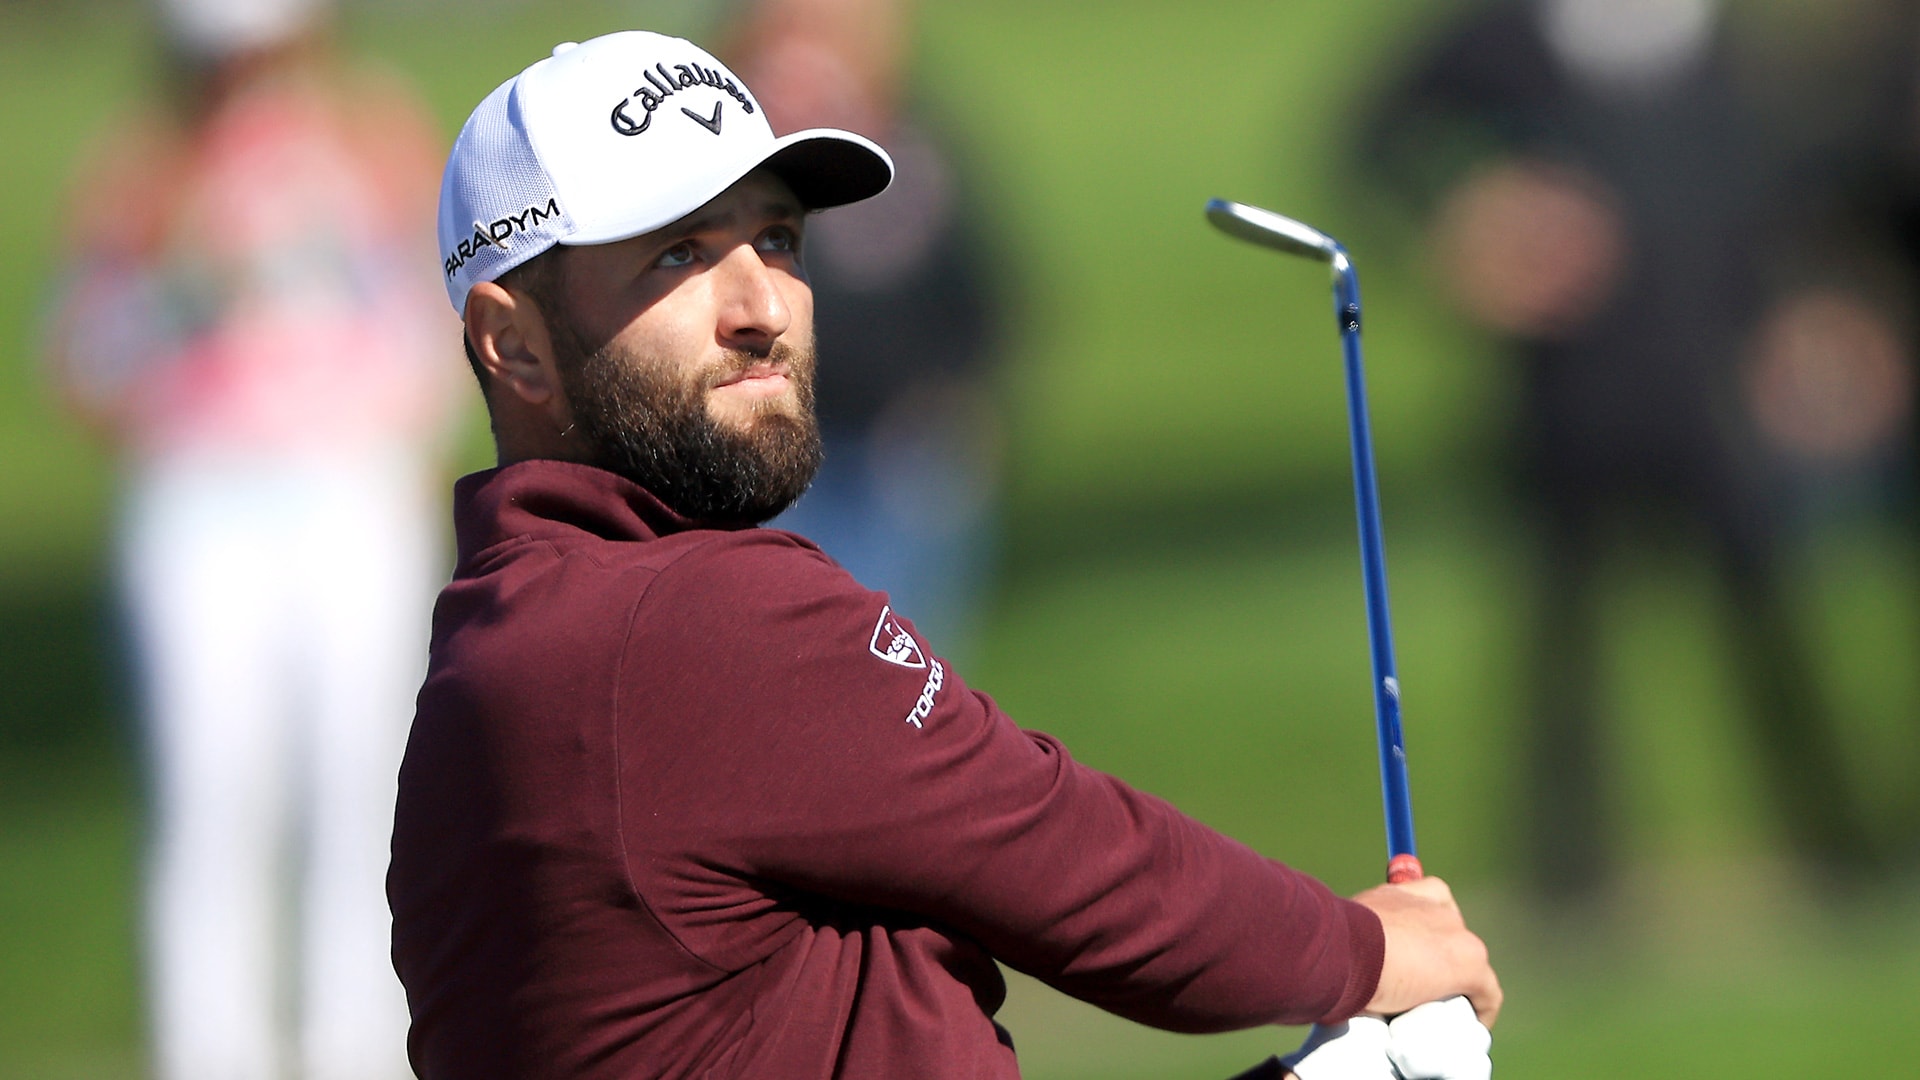 How Jon Rahm Can Overtake Rory McIlroy for World No. 1 This Week